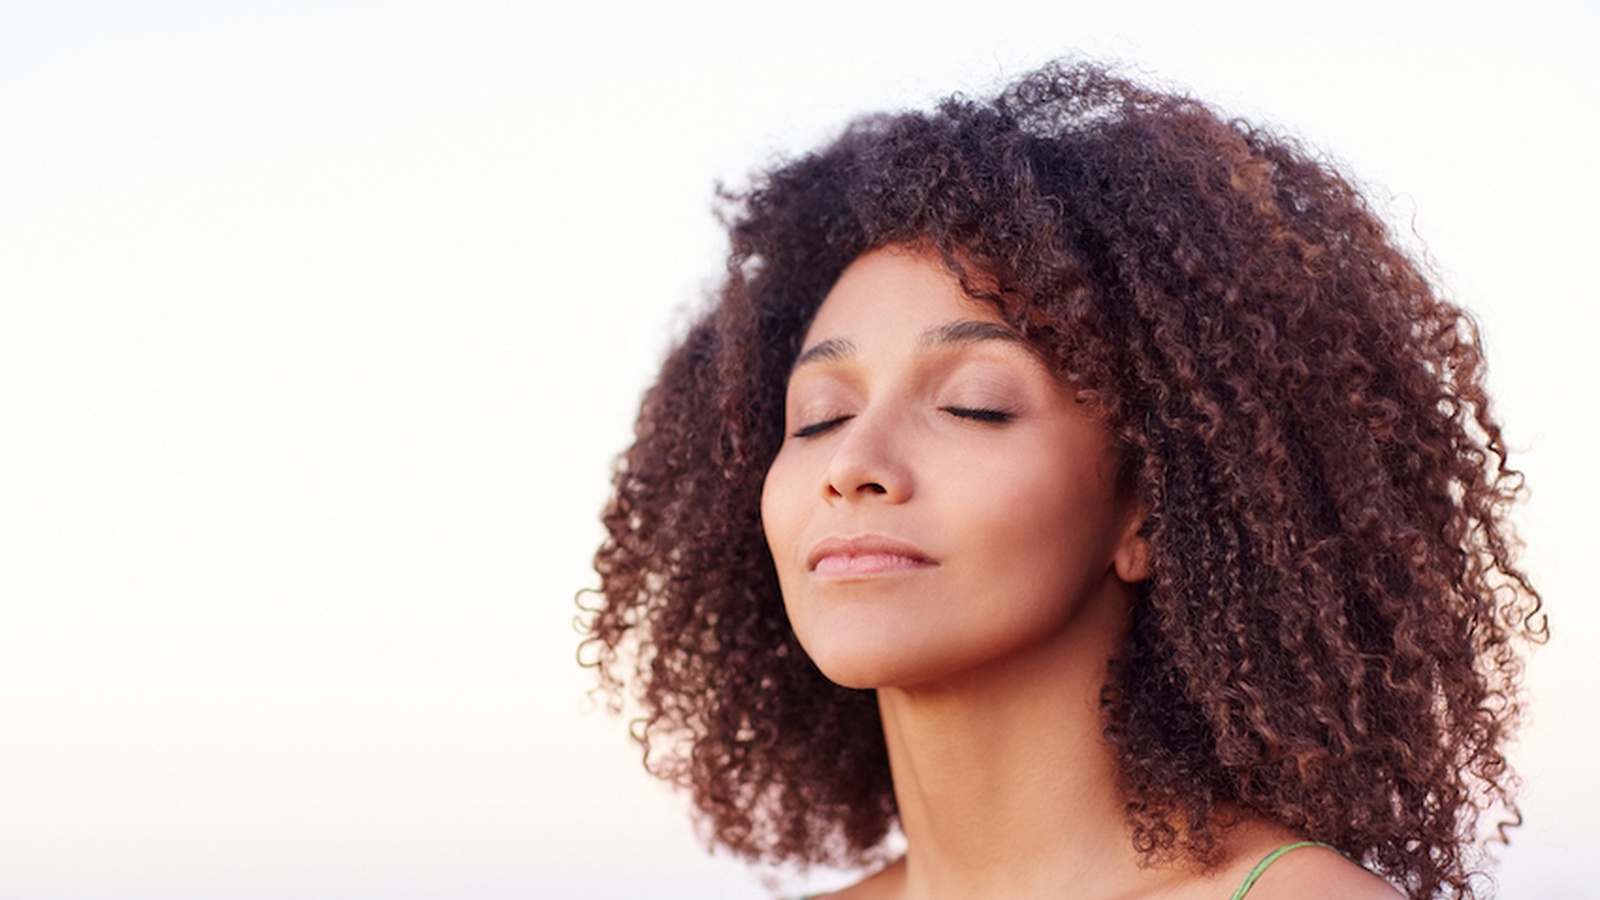 I Tried a Breathwork Exercise for 21 Days and Here's What Happened